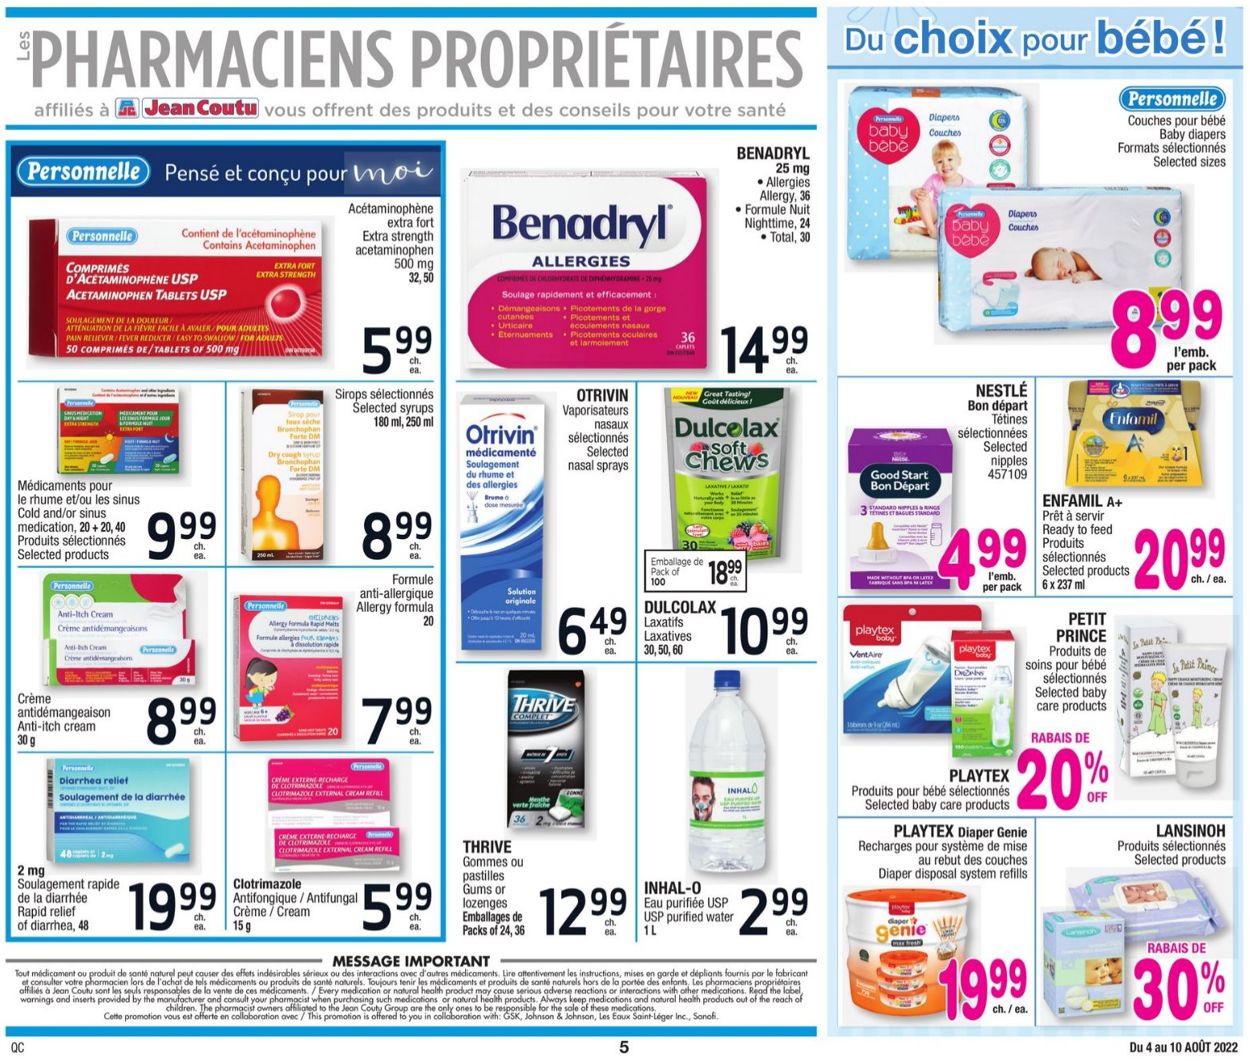 Jean Coutu Flyer from 08/04/2022